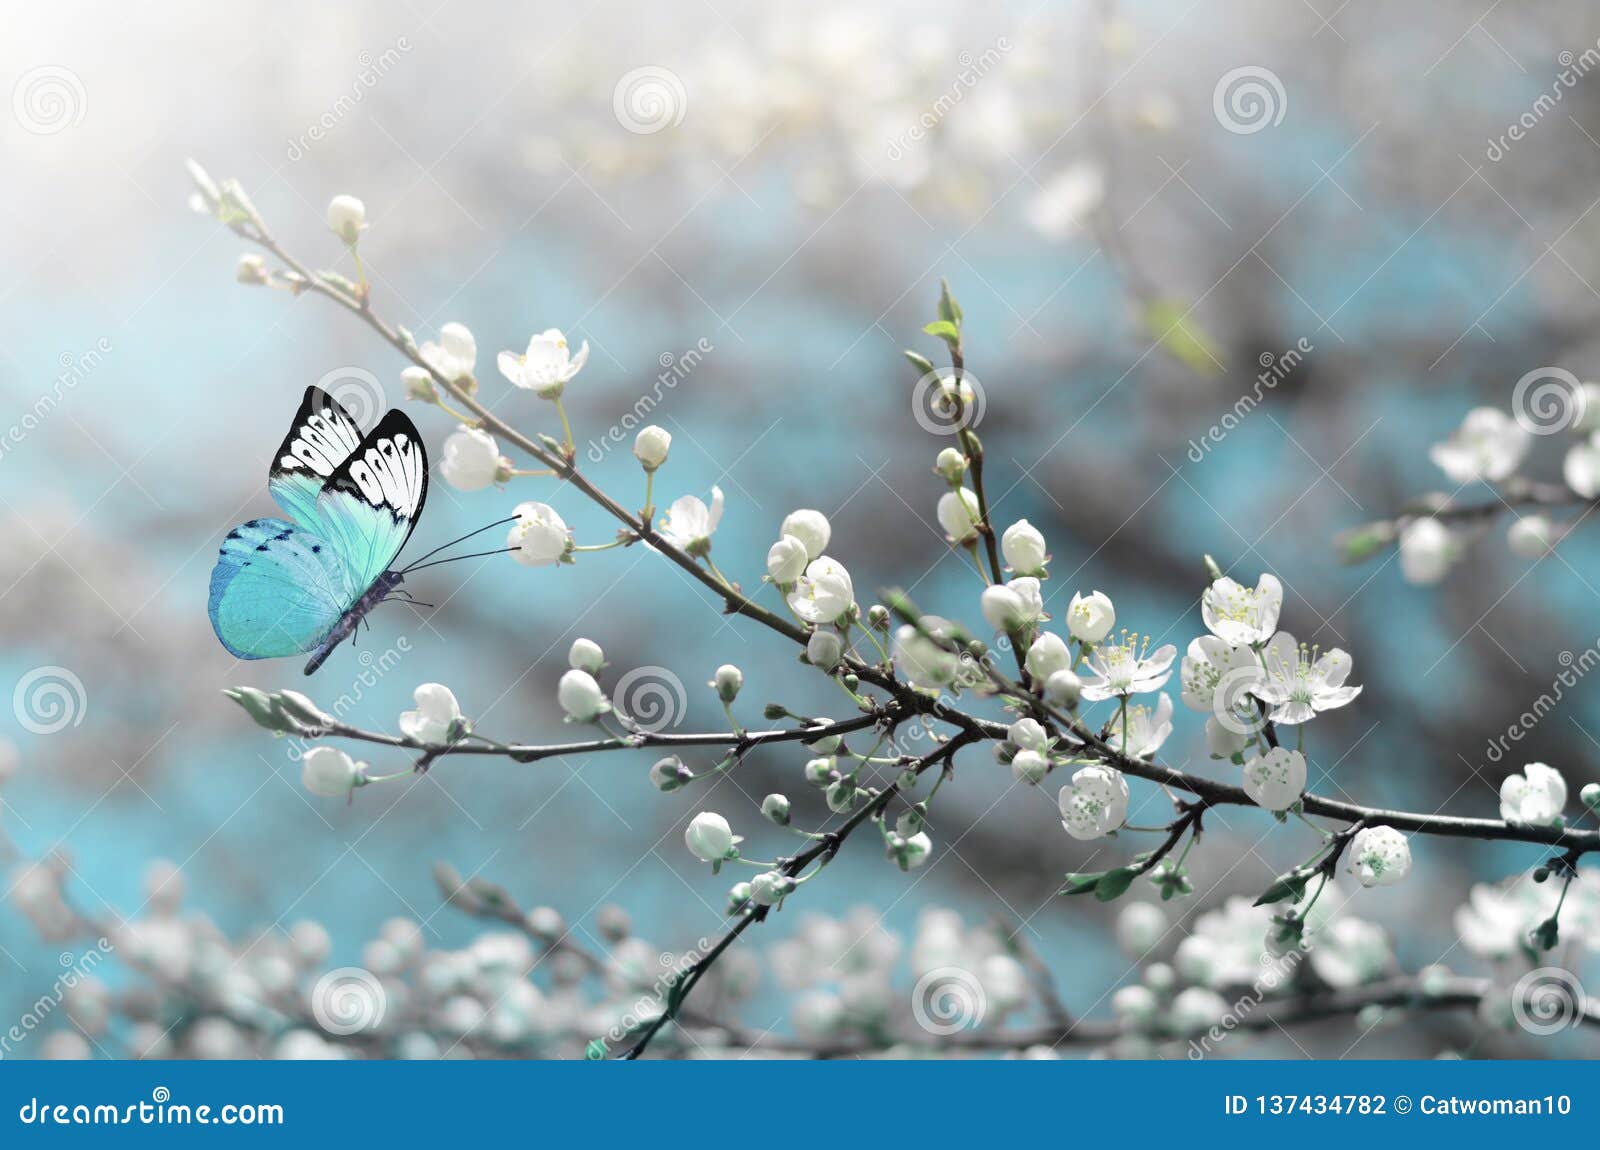 cherry blossom in wild and butterfly. springtime